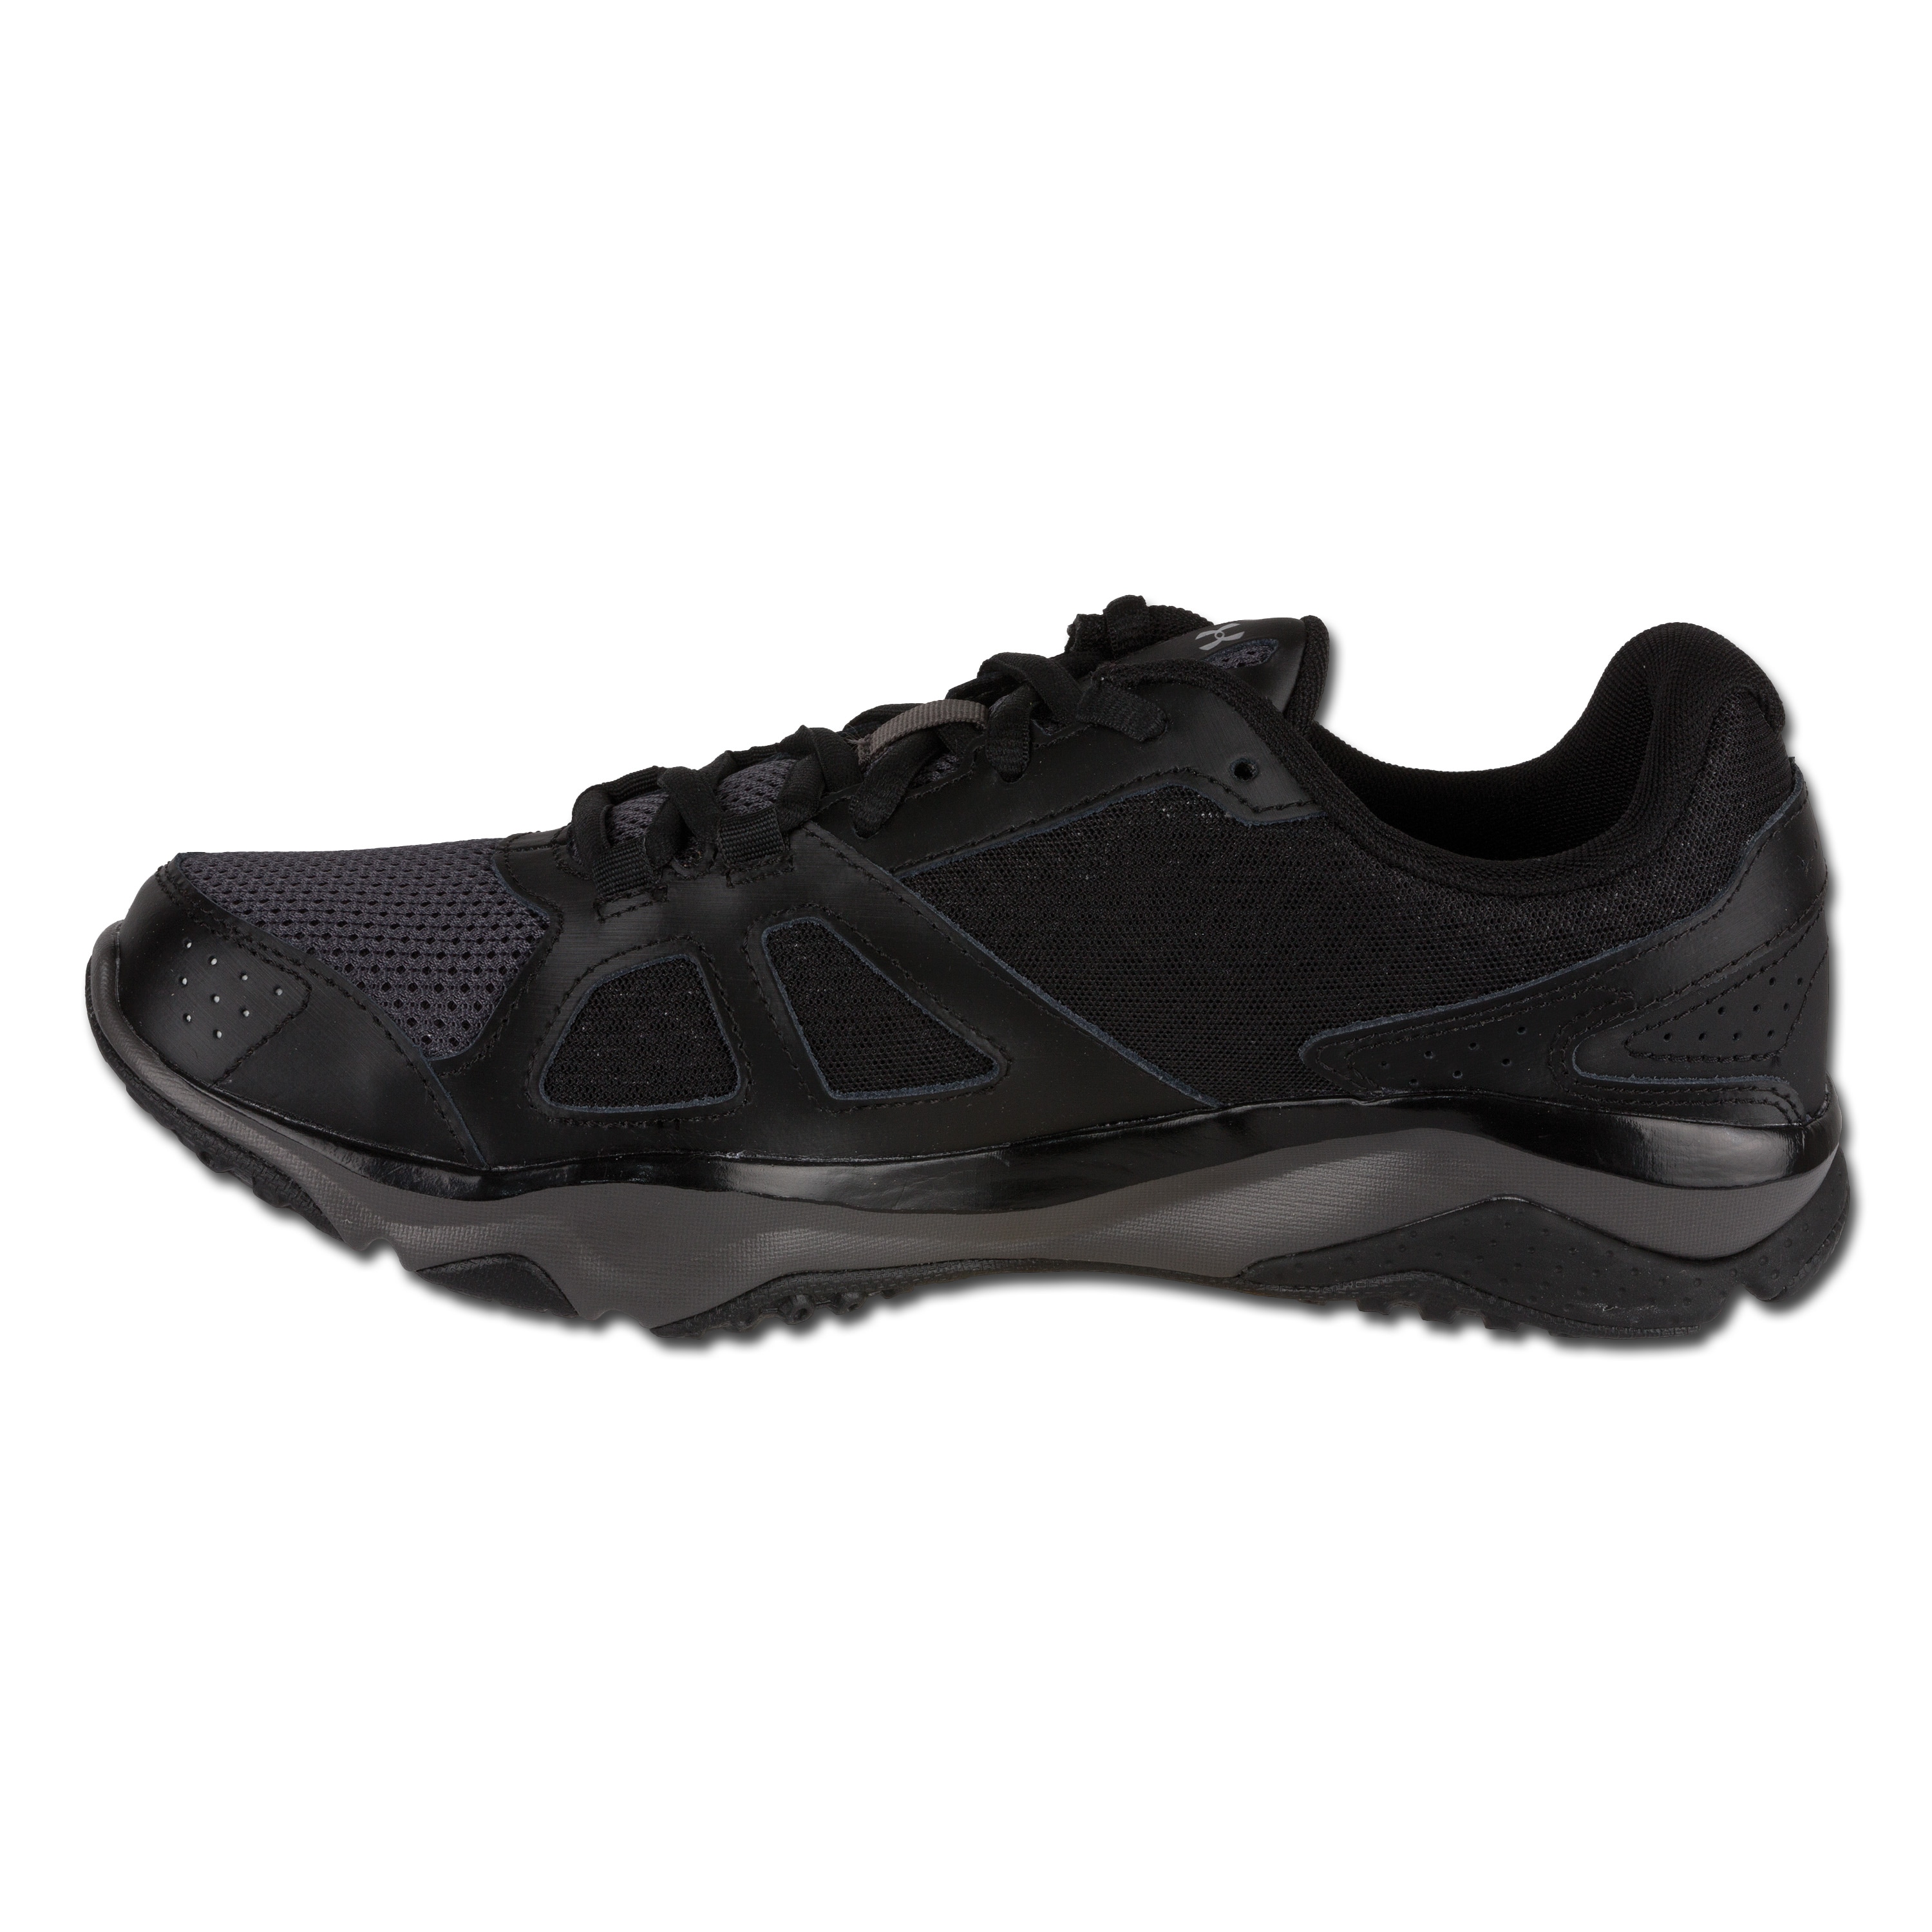 Under Armour Shoe Micro G Strive V black | Under Armour Shoe Micro G ...